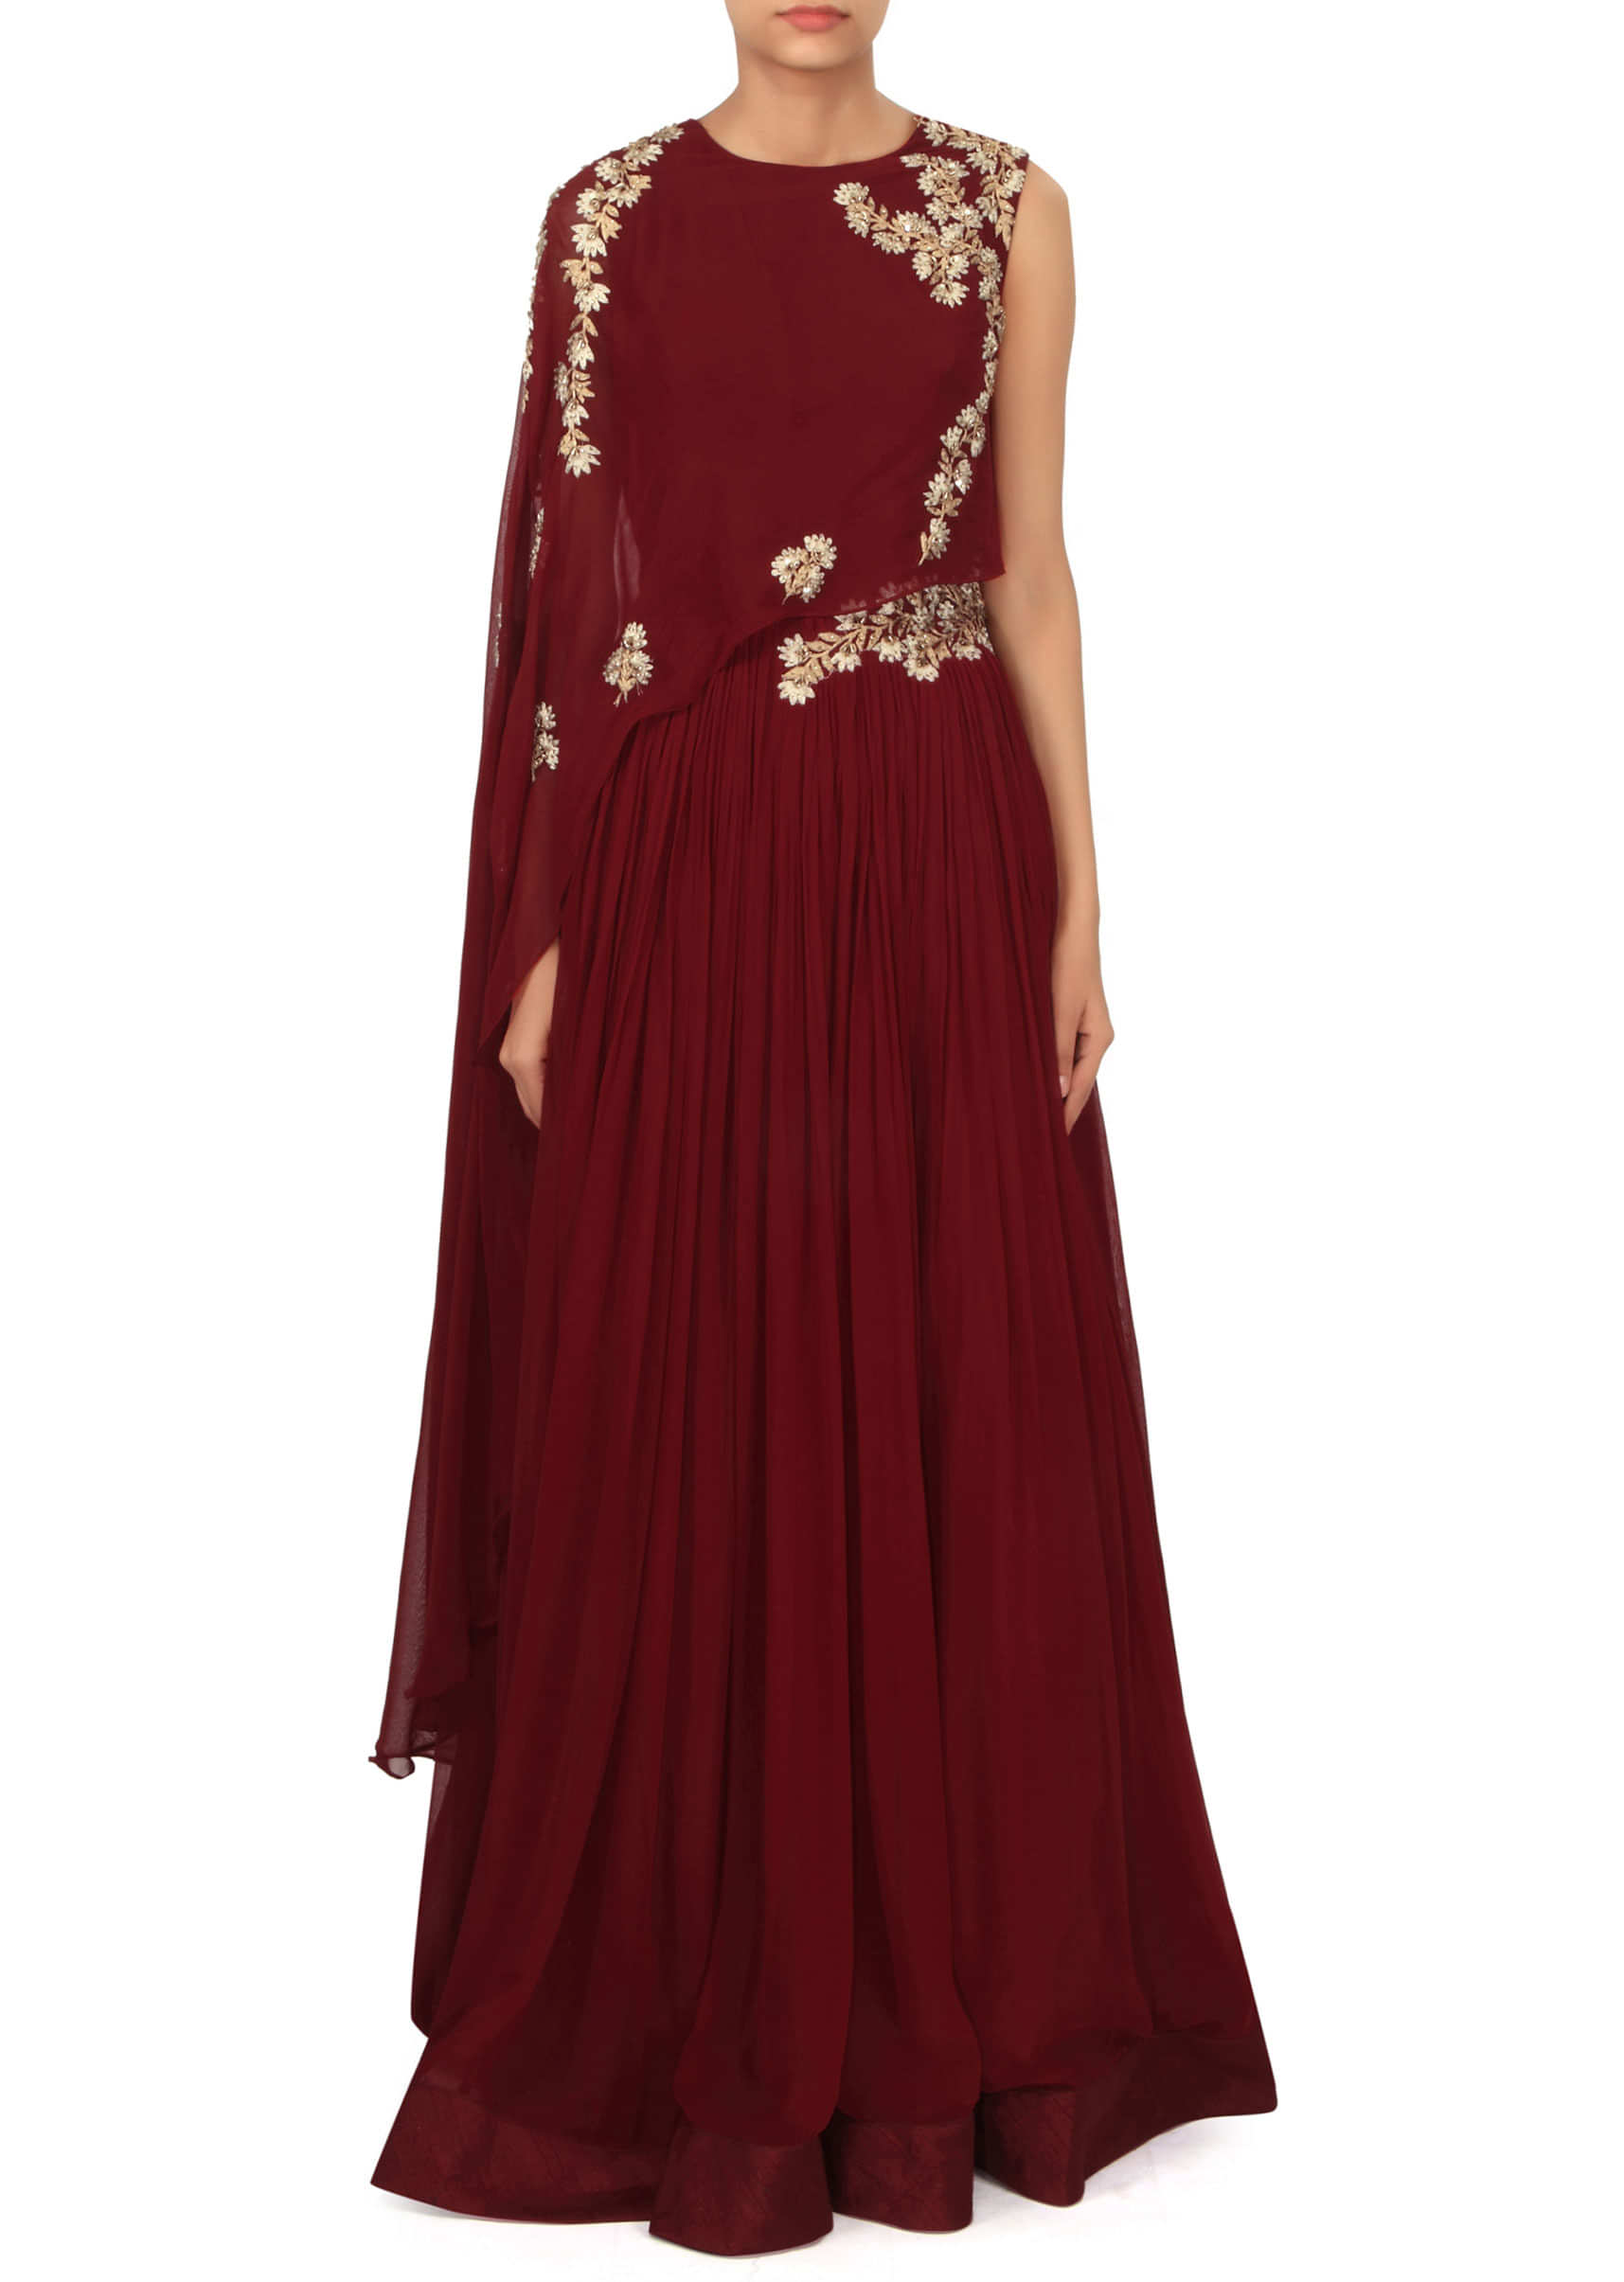 Maroon dress with fancy embellished cape only on Kalki